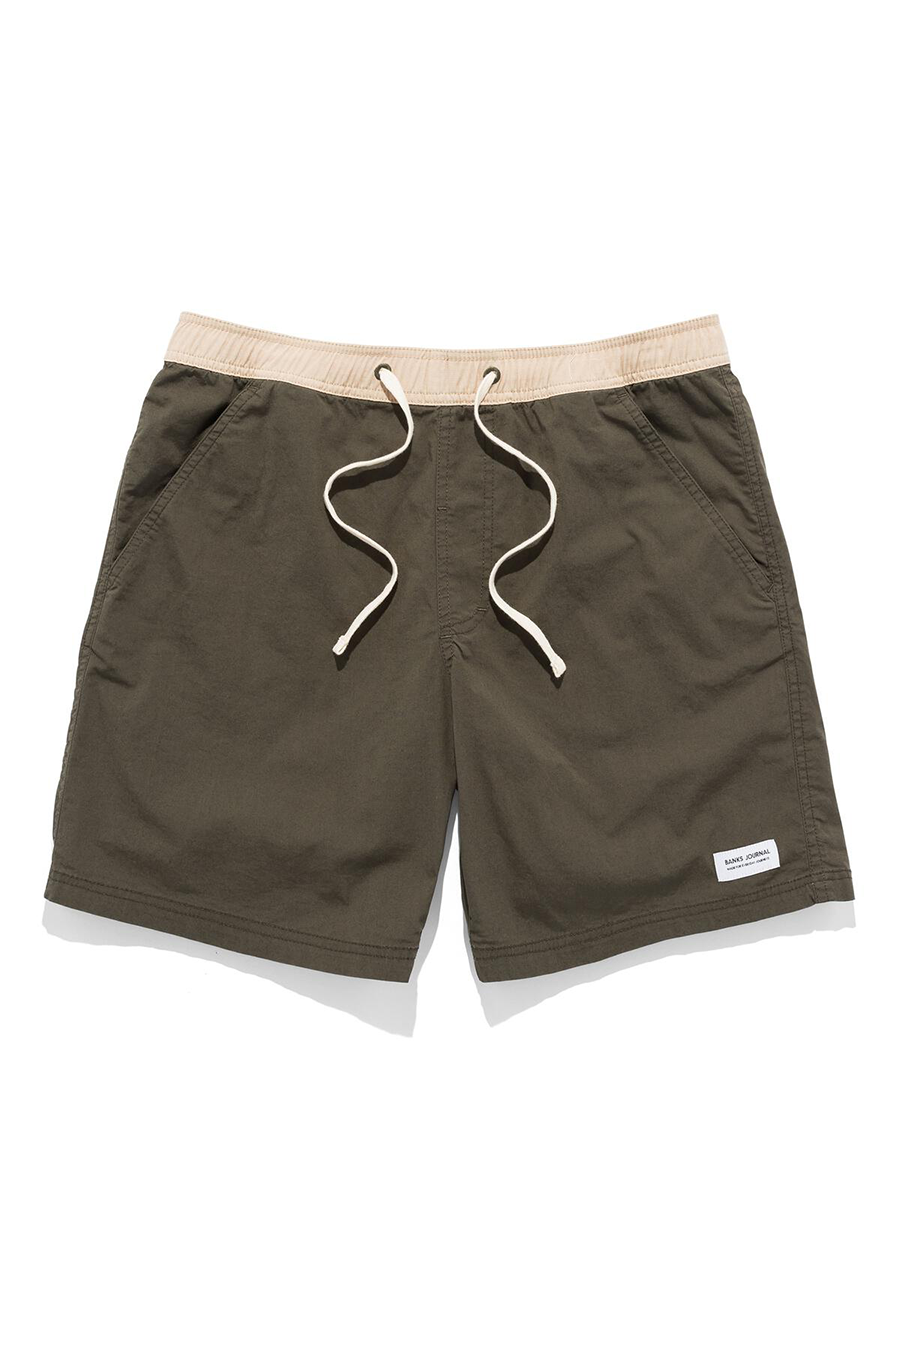 Primary Elastic Boardshort | Army - Main Image Number 1 of 1